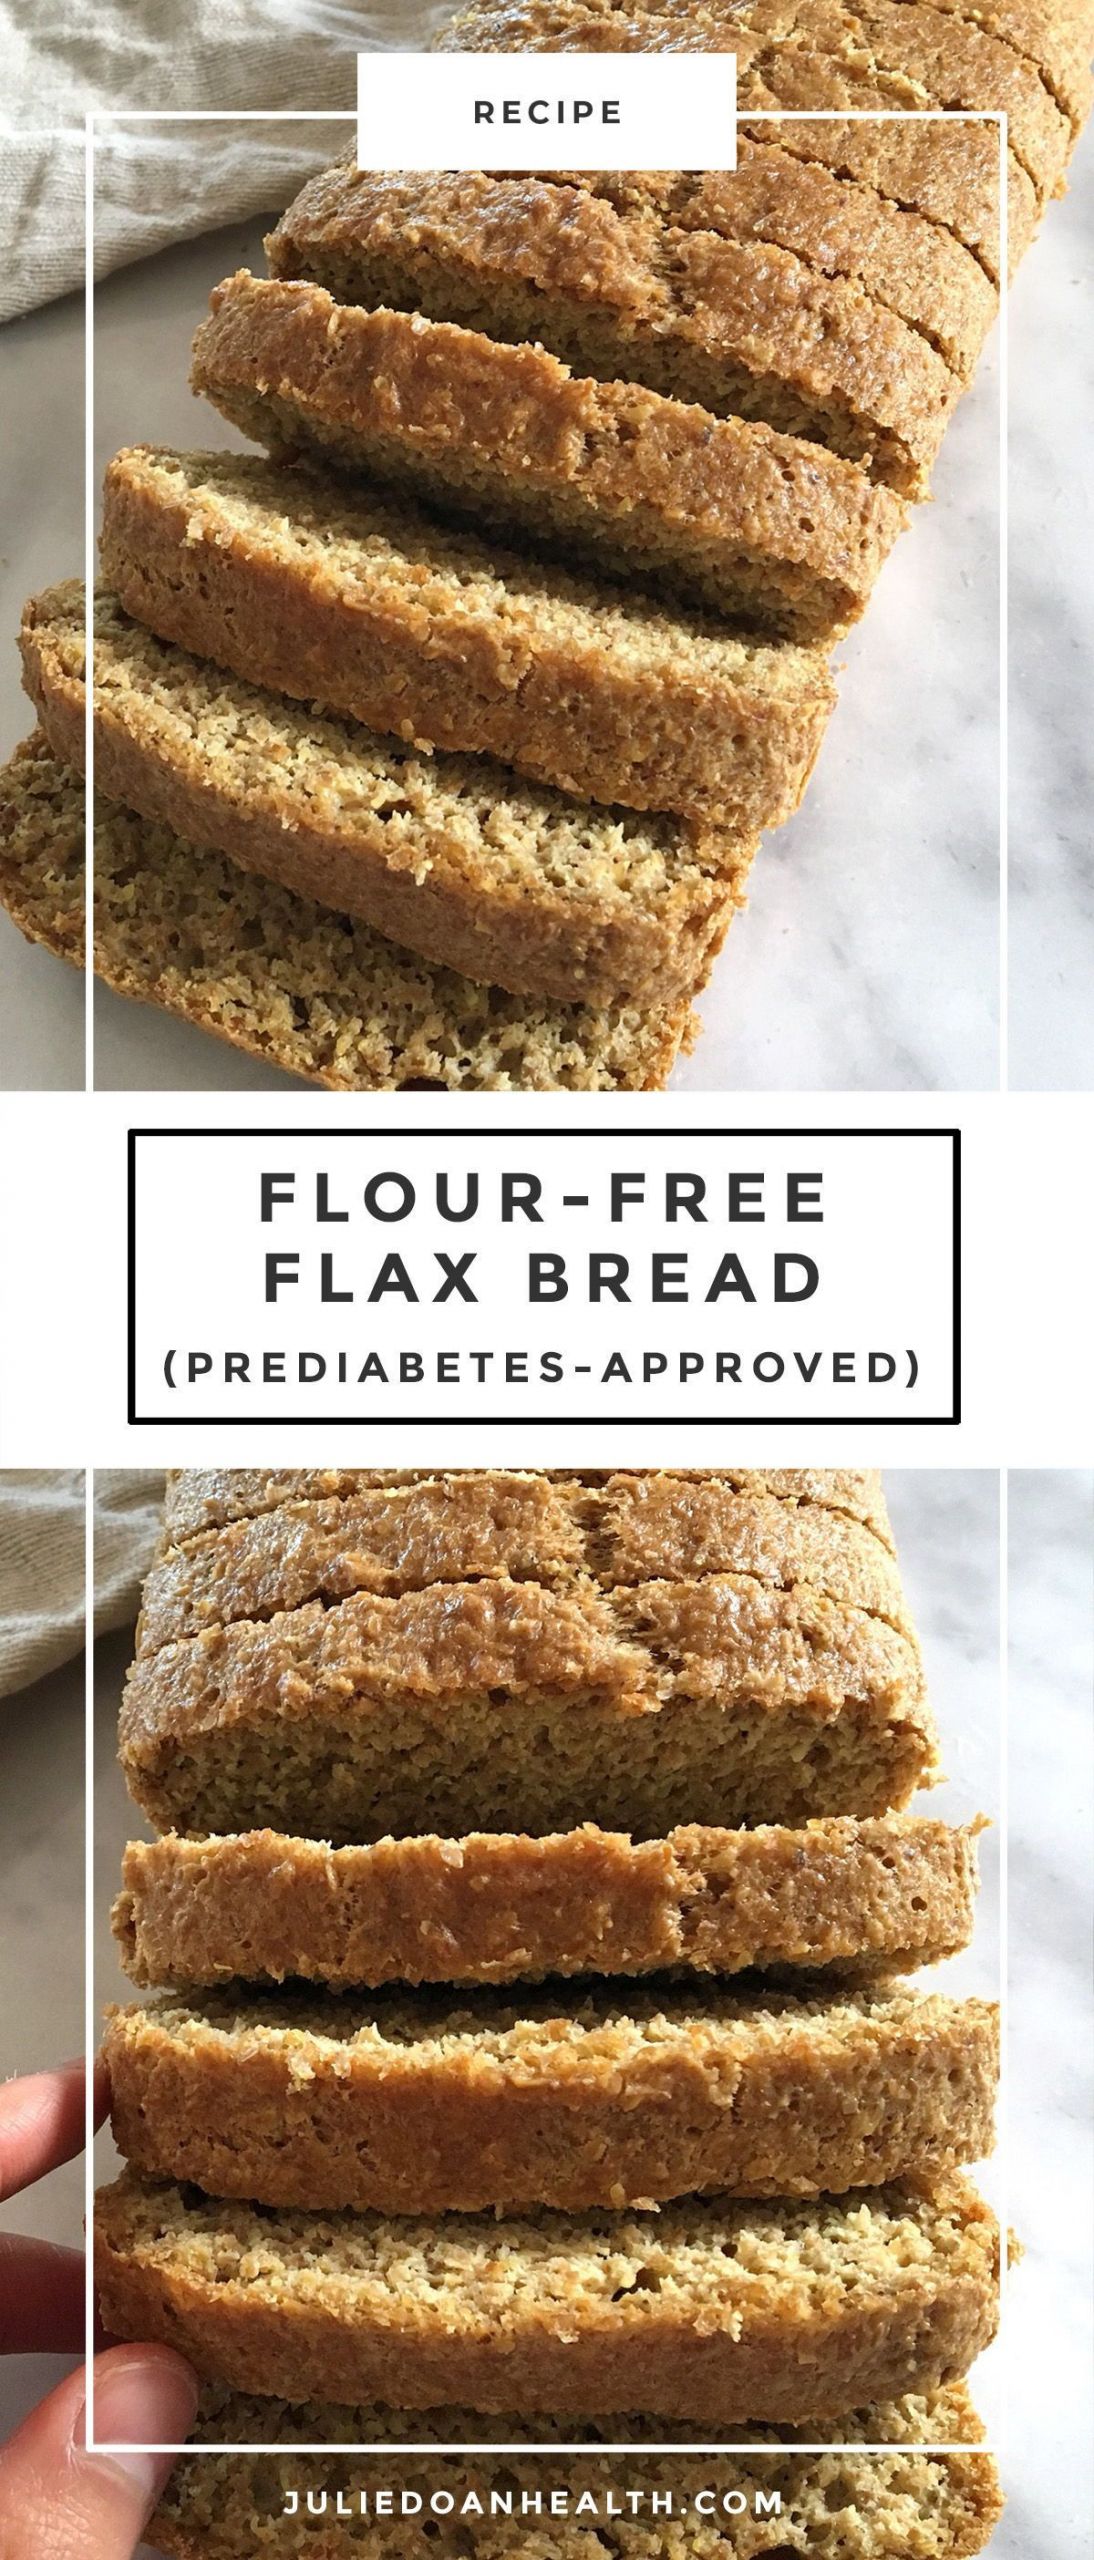 Low Carb Bread Recipes For Diabetics
 A delicious low carb and flour free flax seed bread full